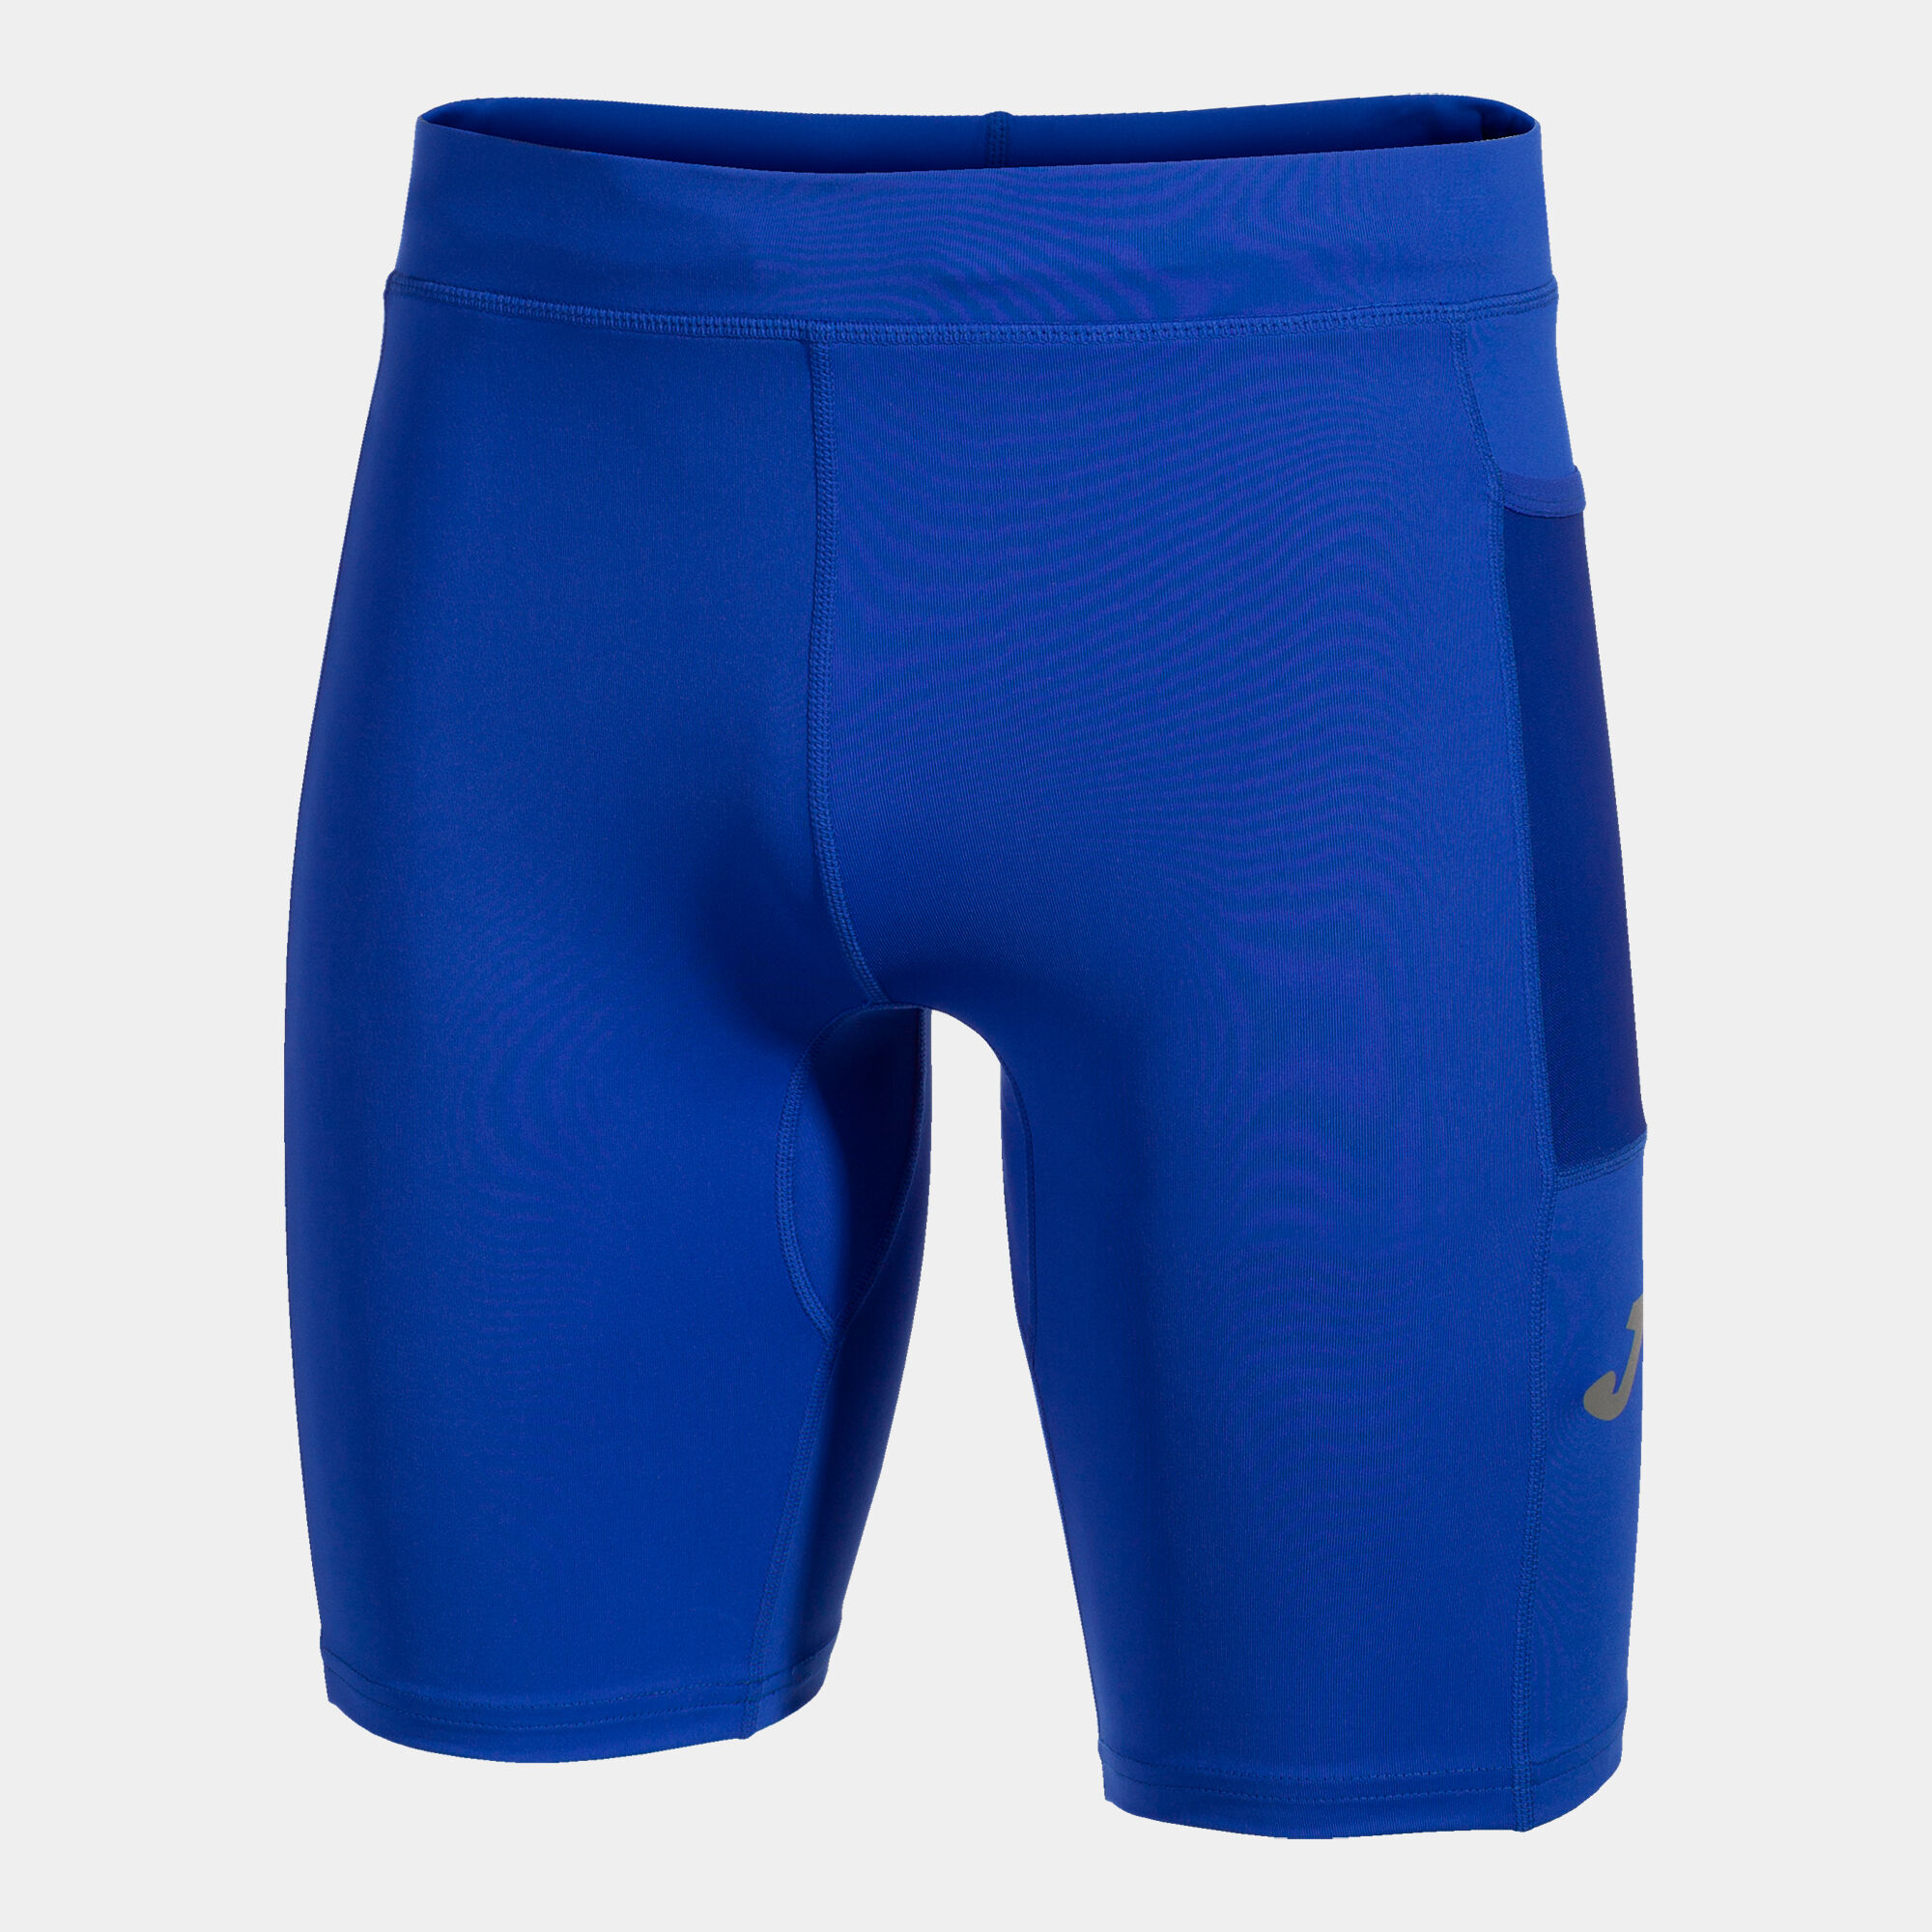 RUNNiNG SHORTS WITH INNER TIGHTS UNISEX..OEM QUALITY